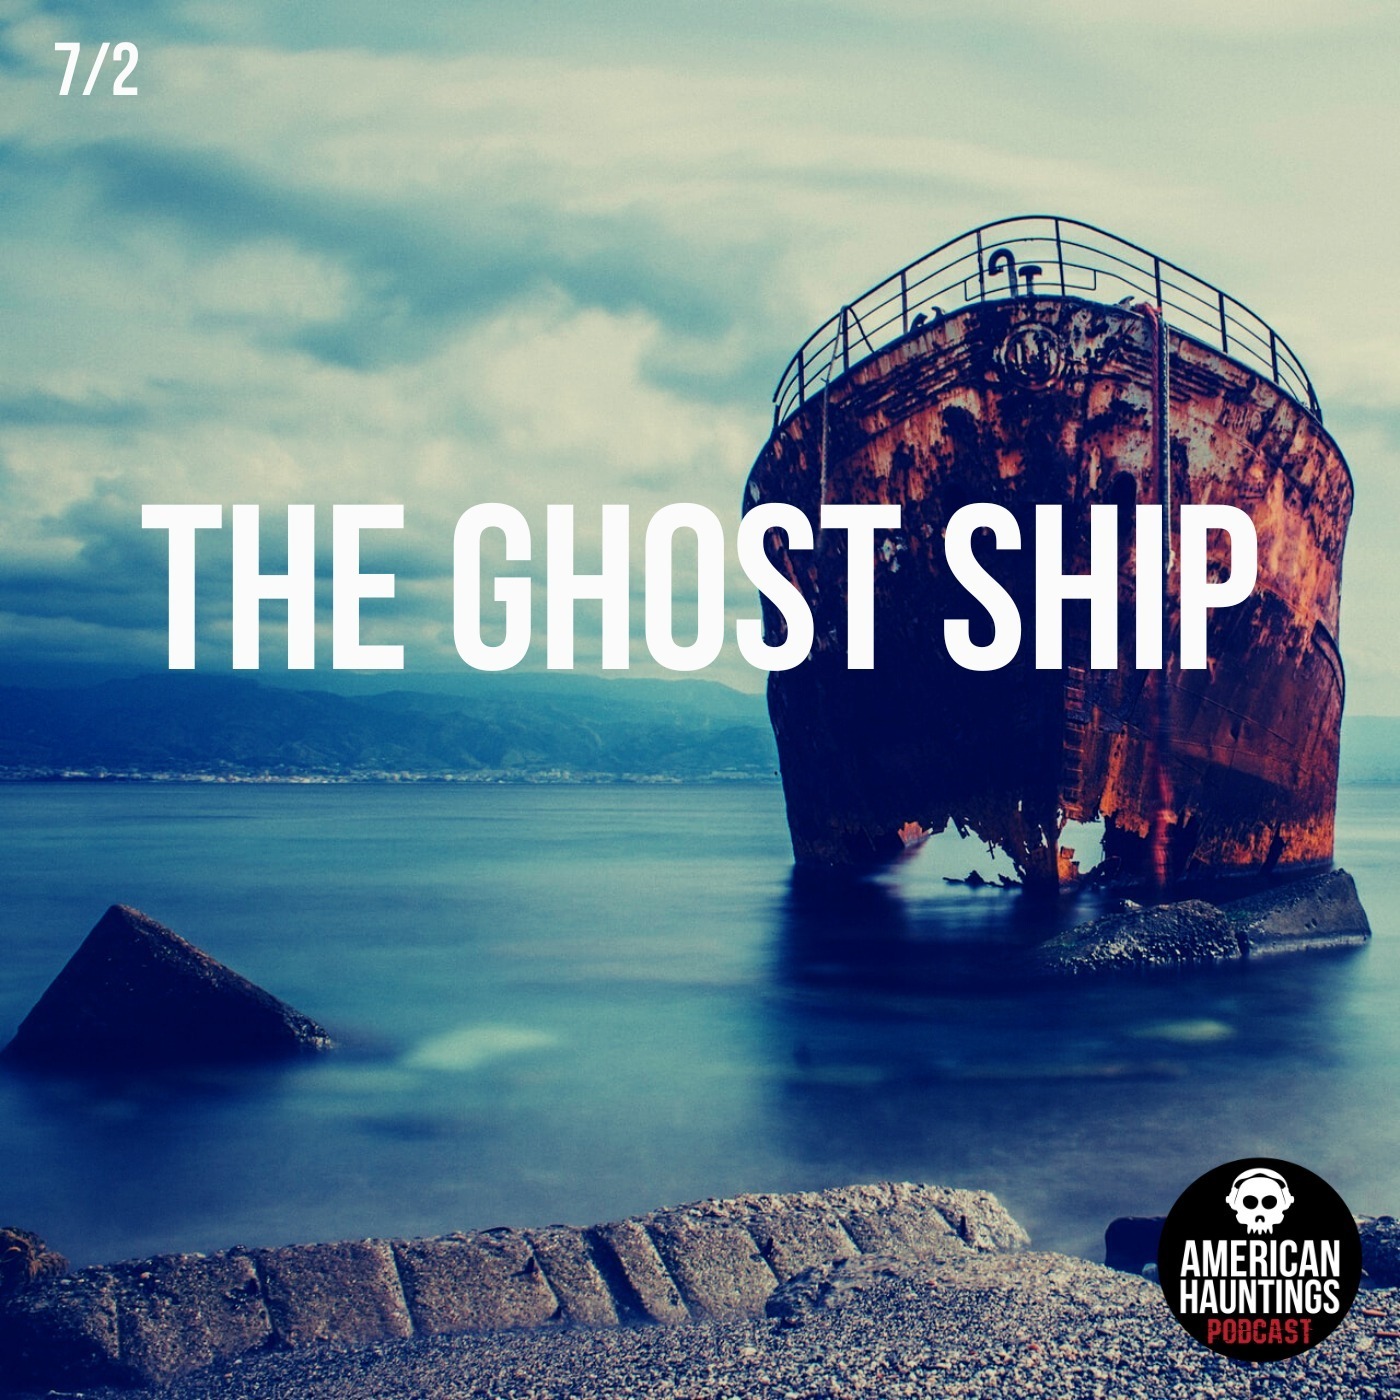 The Ghost Ship (The tragedy of the Mary Celeste)